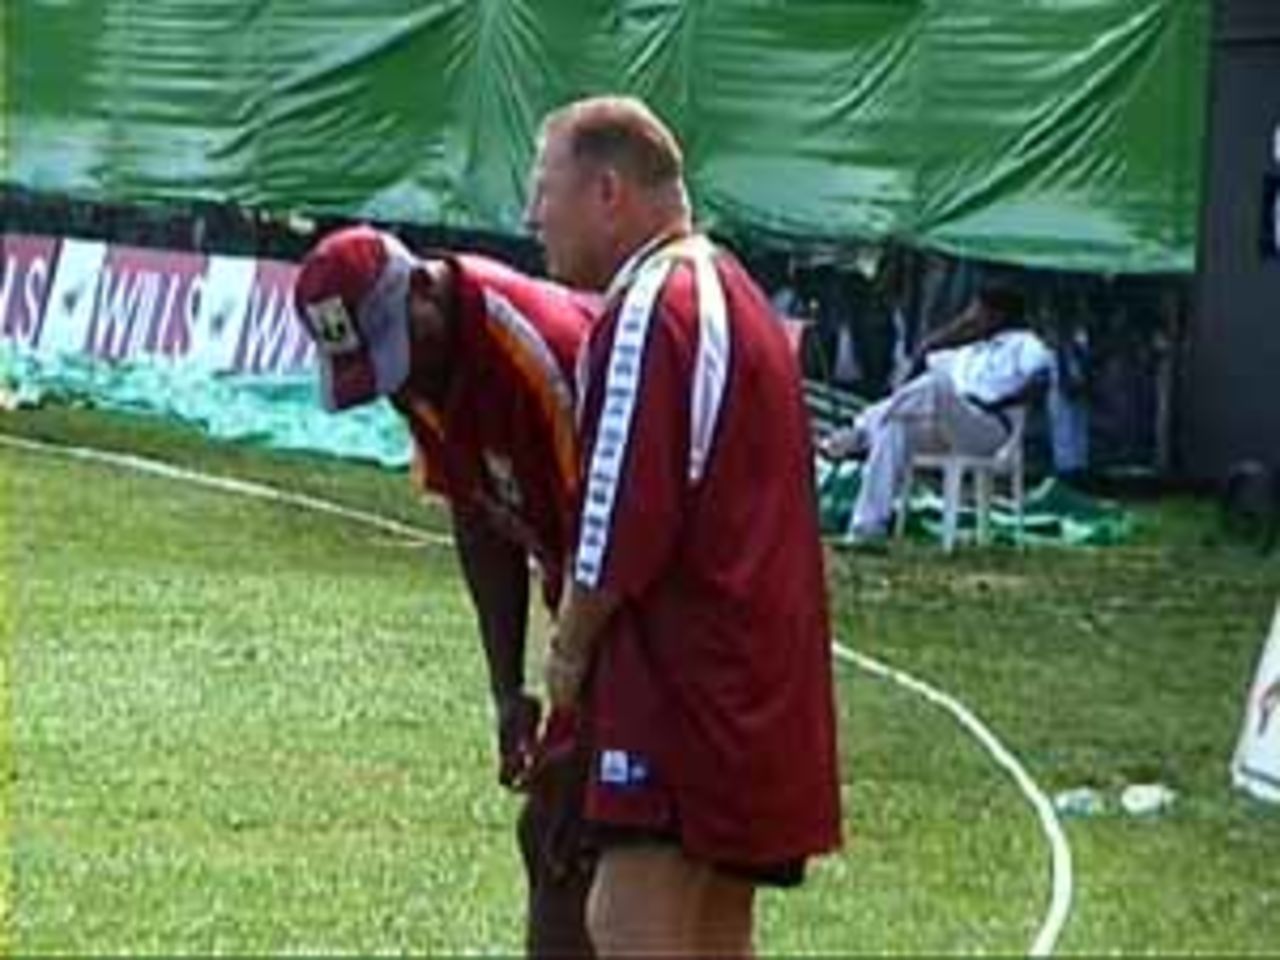 West Indian physio Dennis Waight waits anxiously at the boundary line, India v West Indies (3rd ODI), Coca-Cola Singapore Challenge, 1999-2000, Kallang Ground, Singapore, 5 Sep 1999.